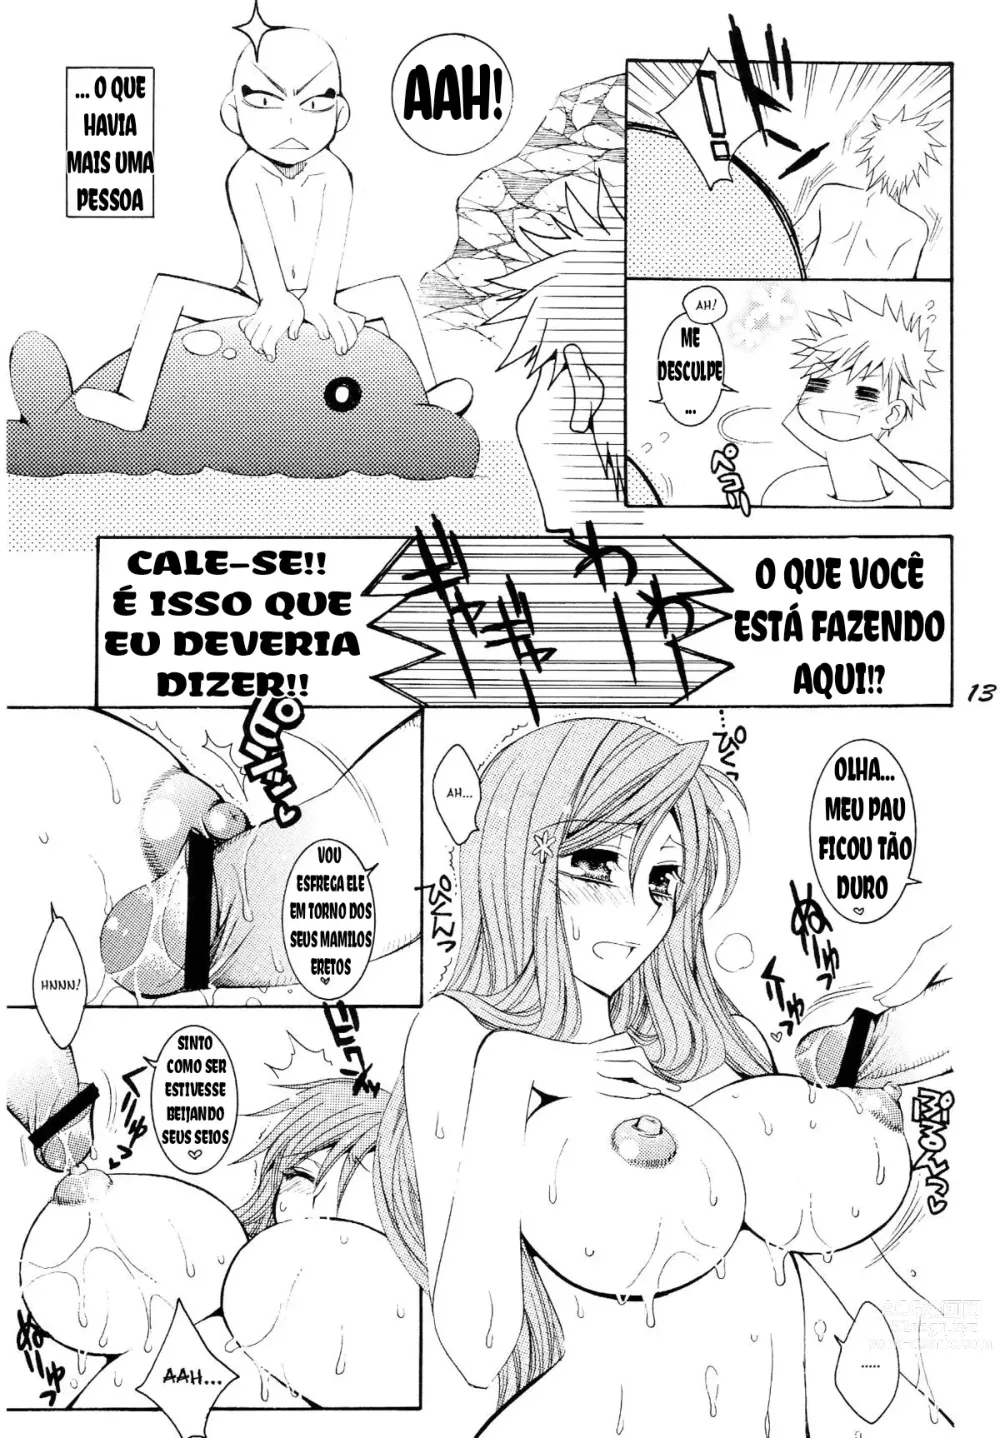 Page 12 of doujinshi CHICK CHICK CHICK